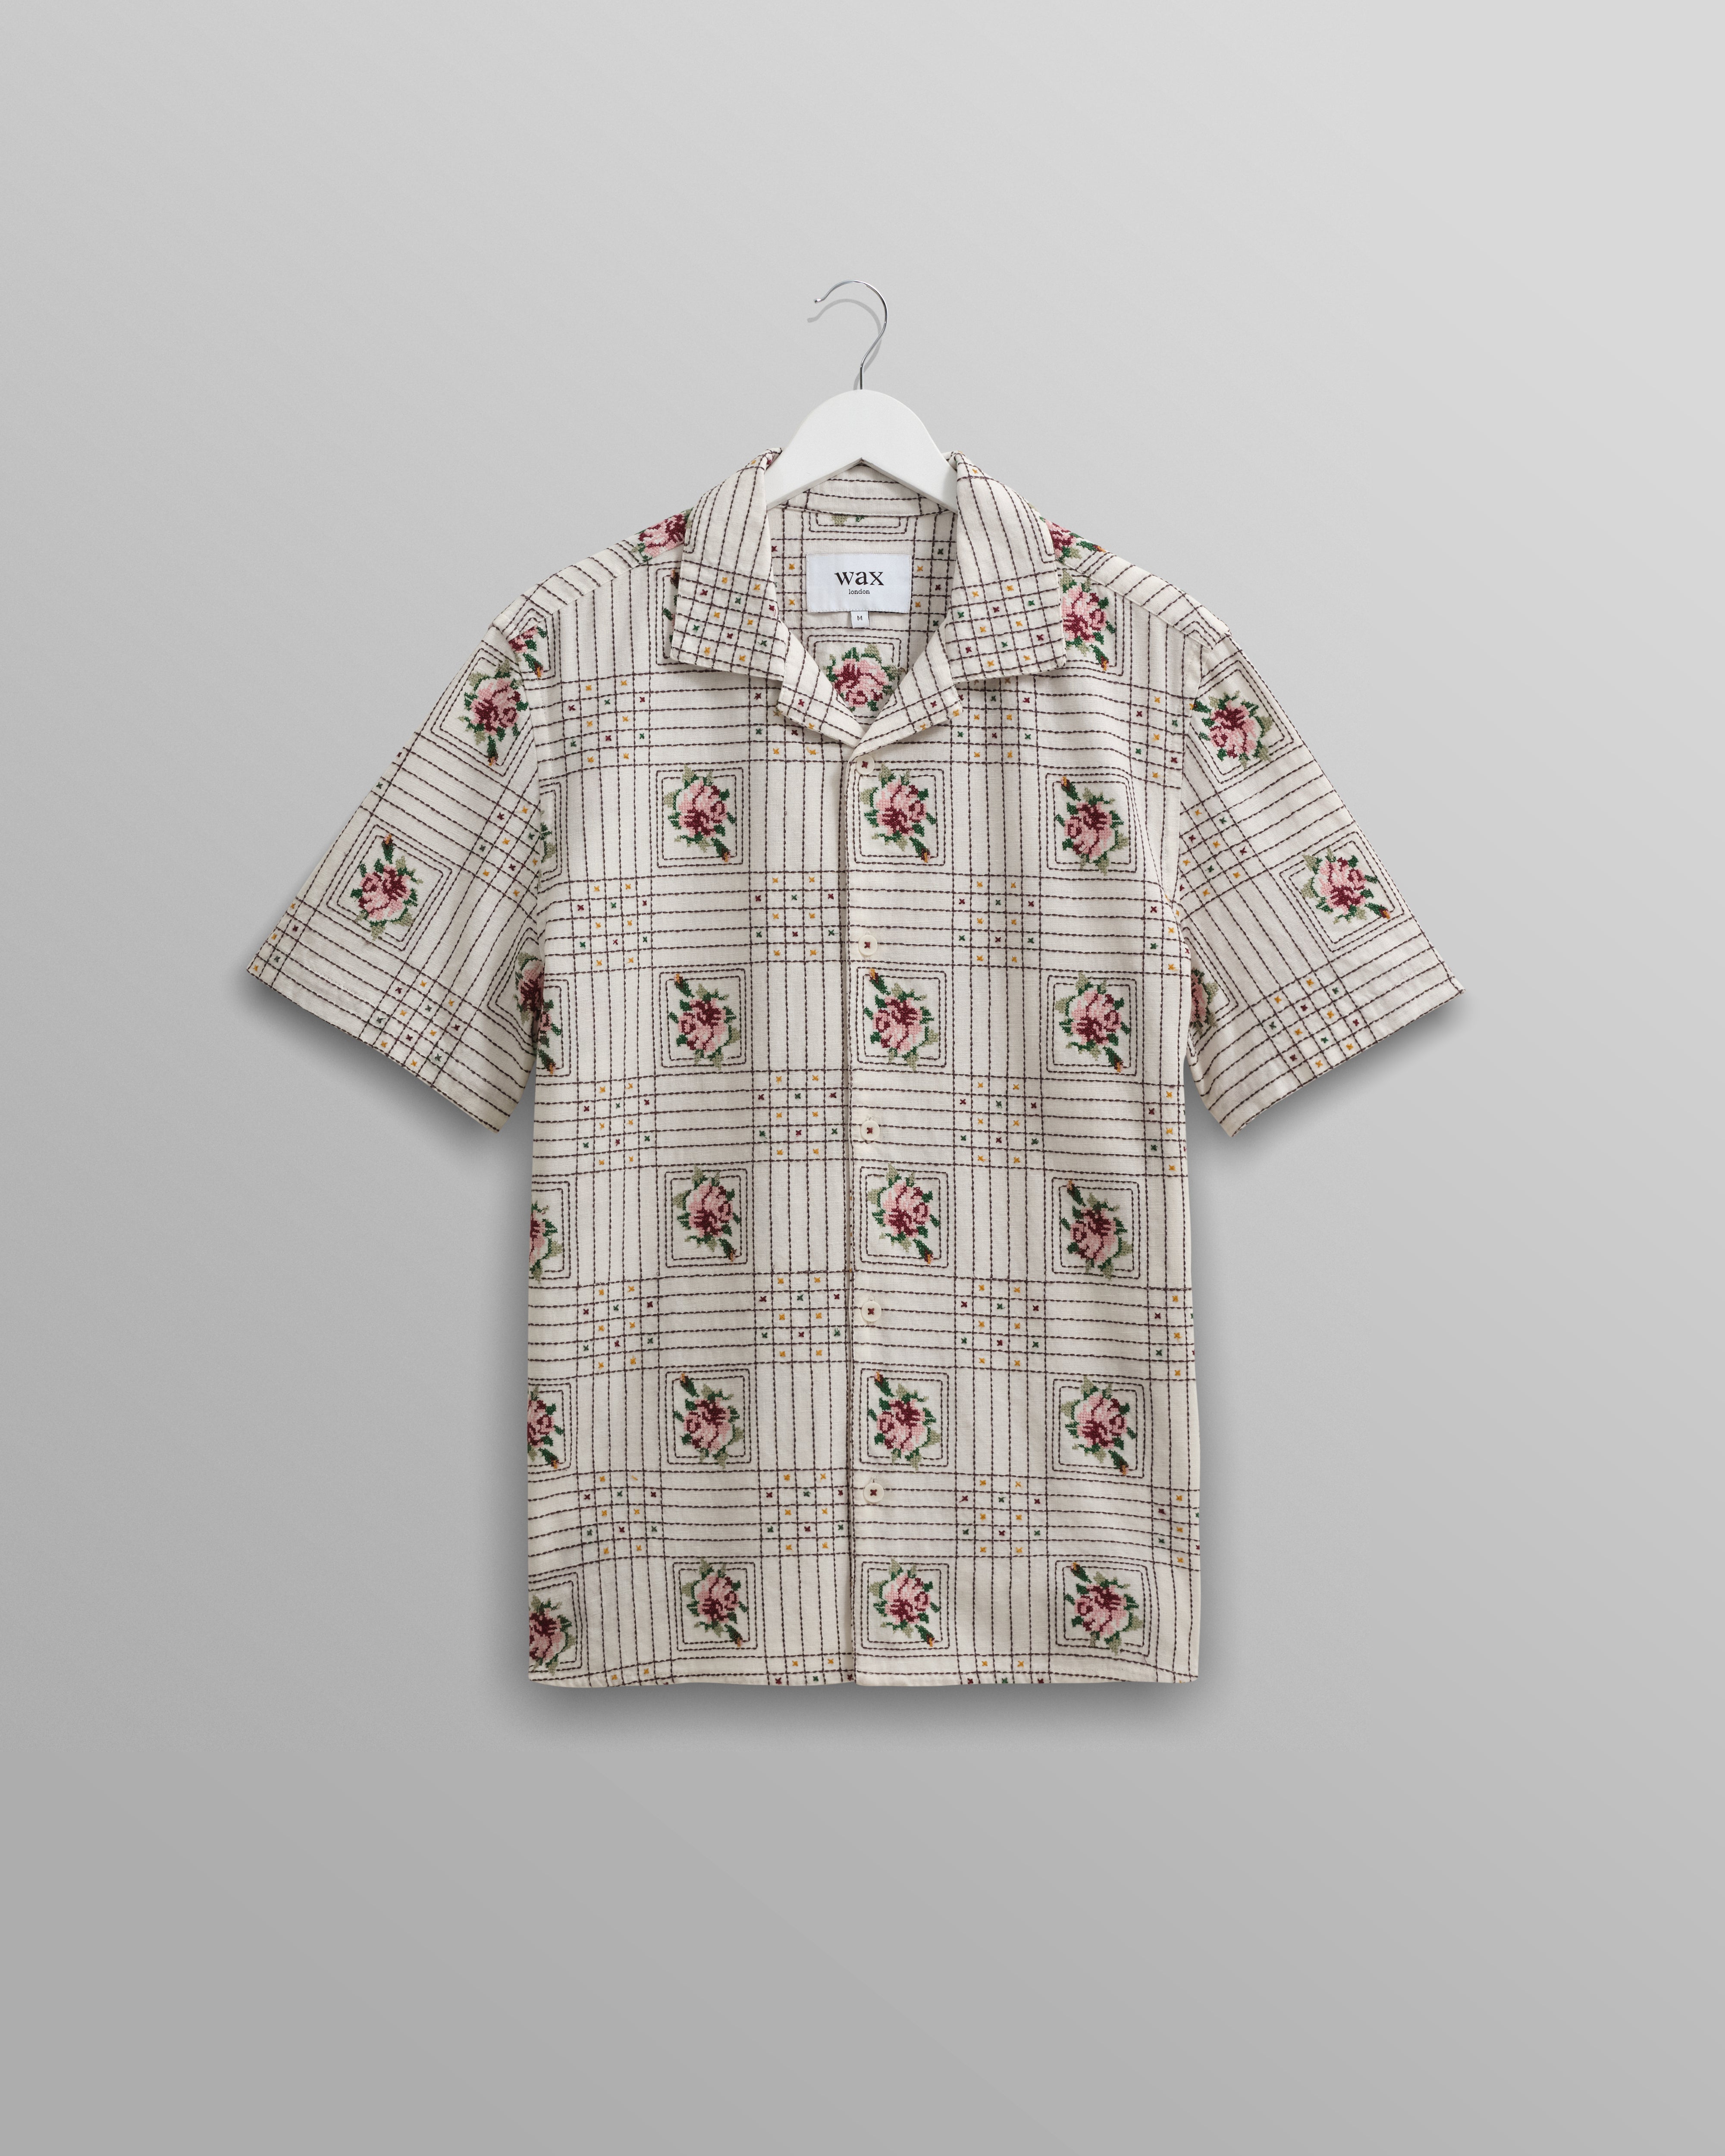 wax-london-didcot-ss-shirt-tapestry-embroidery-ecru